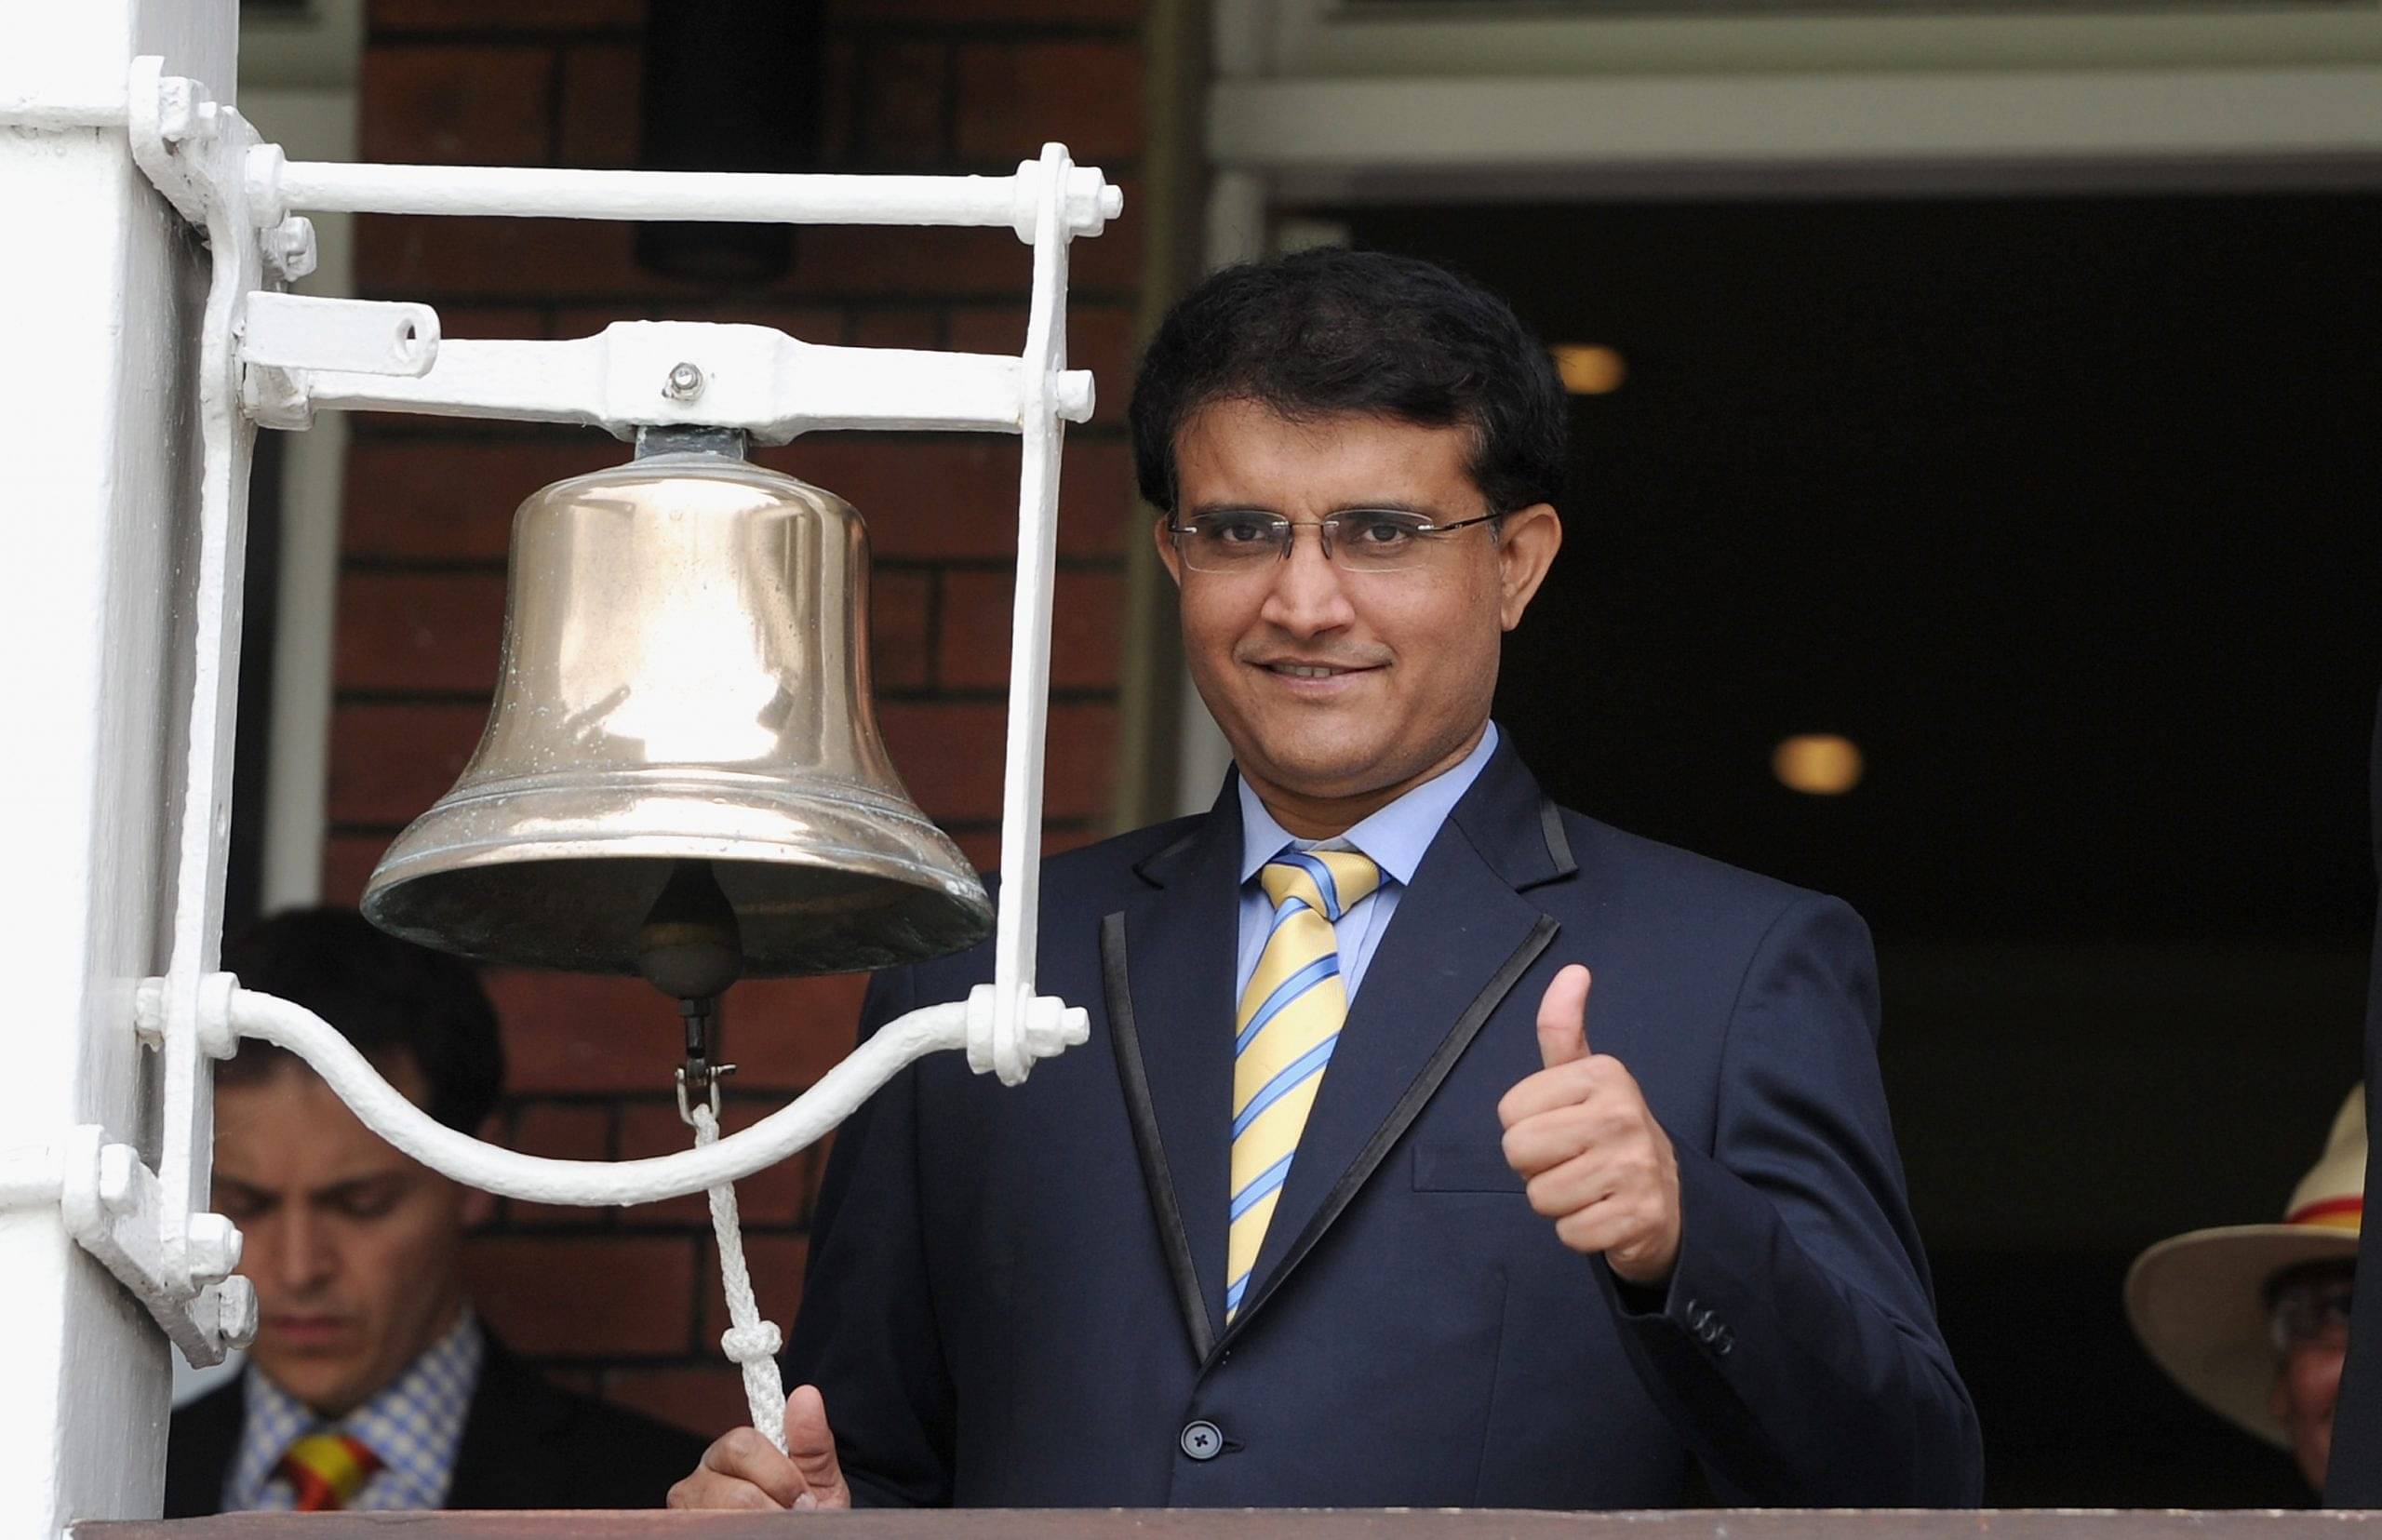 Sourav Ganguly biopic actor: Who will play the role of Sourav Ganguly in his biopic?